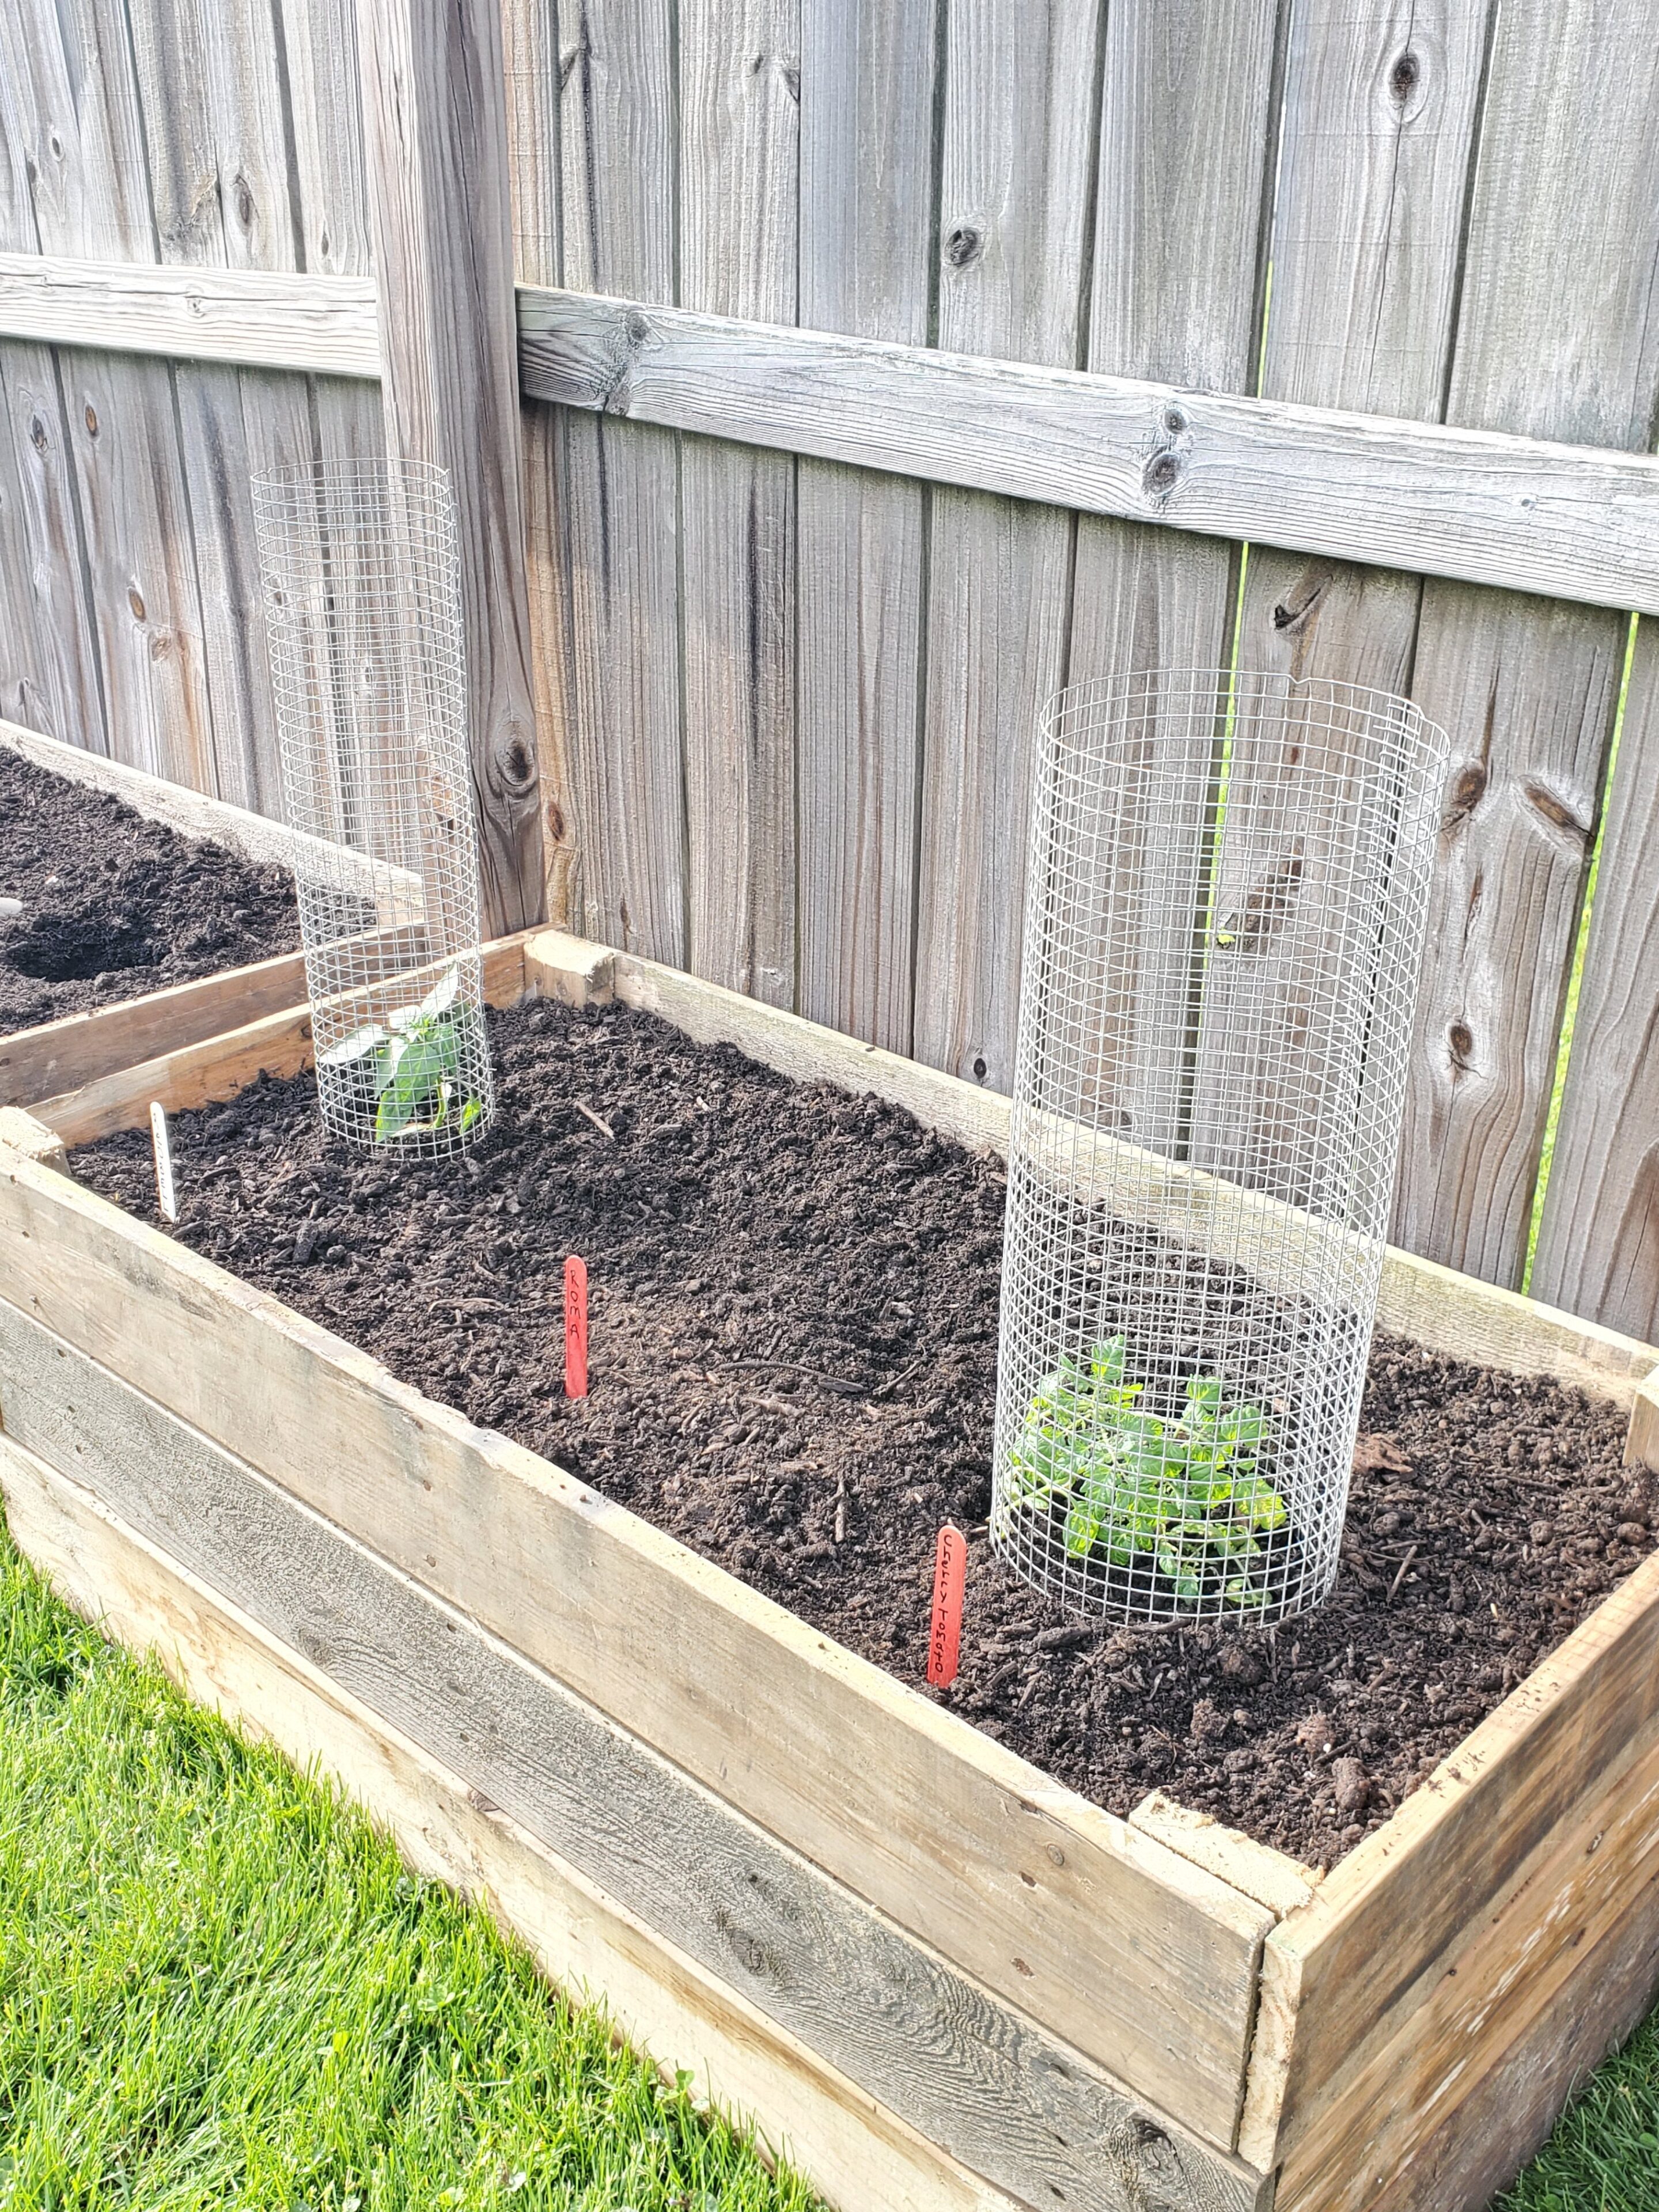 How To Build Raised Garden Beds From, Building A Garden Box From Pallets